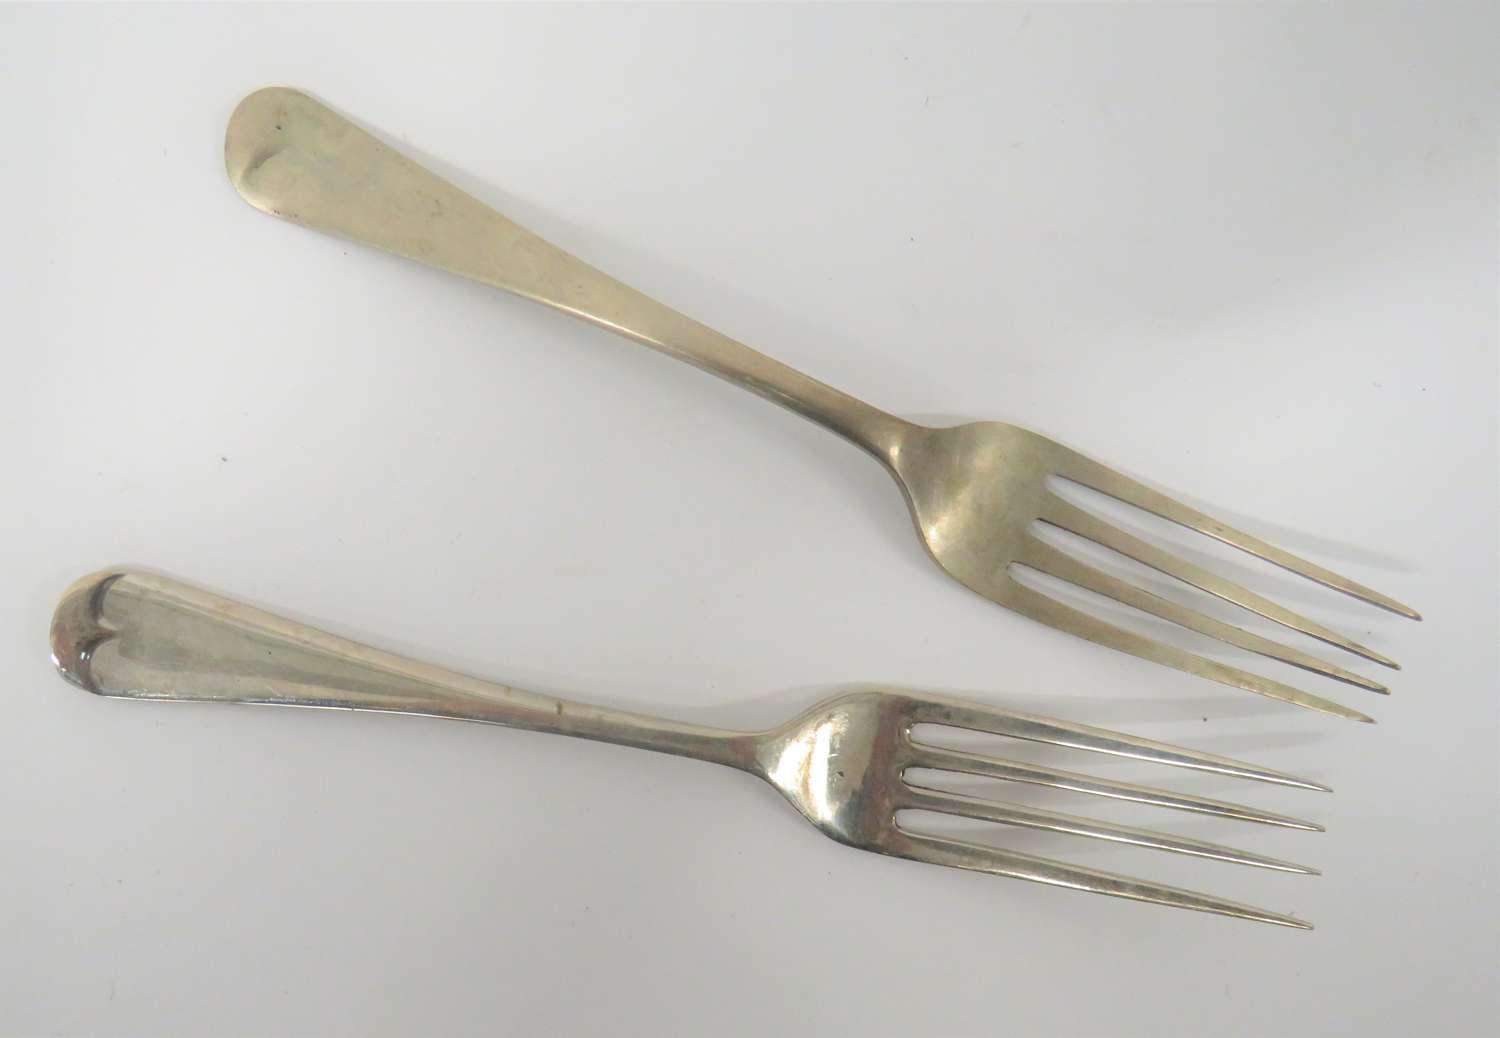 Two 1944 British Army Issue Forks